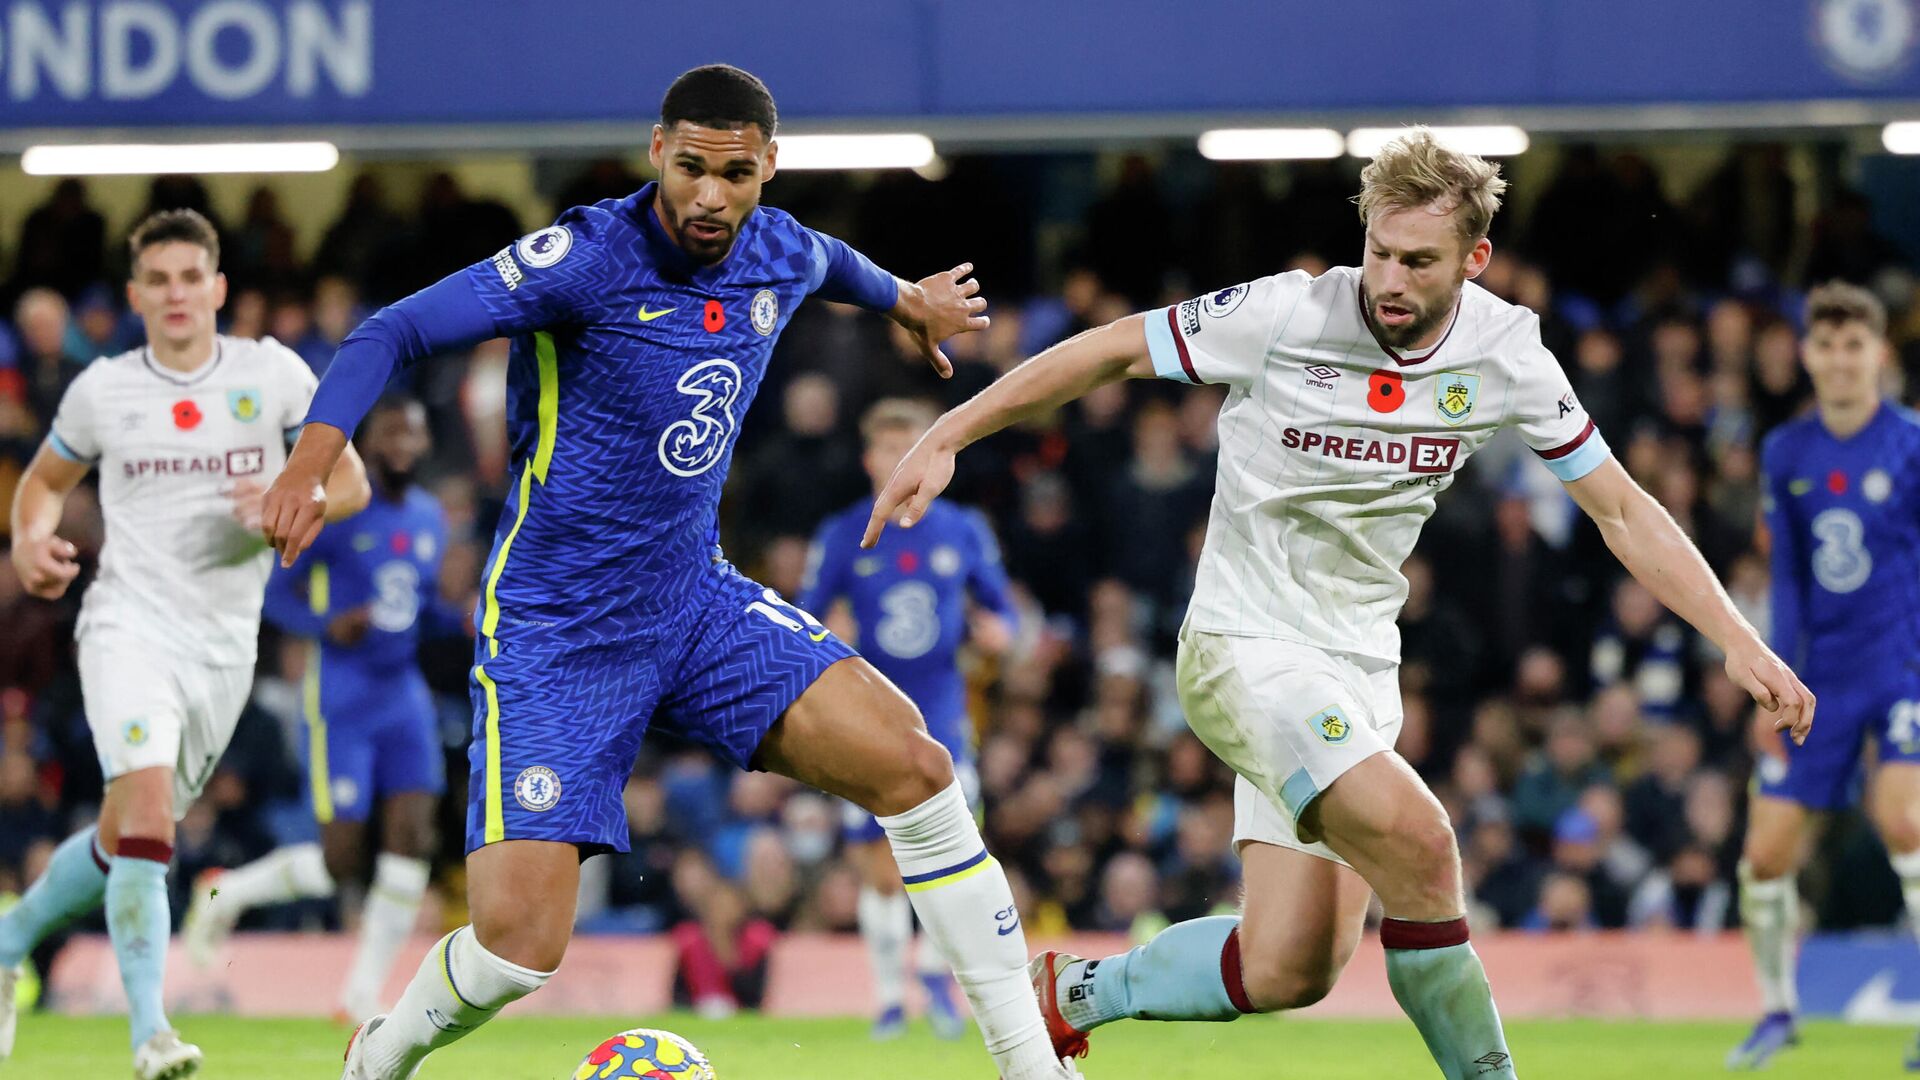 Chelsea's English midfielder Ruben Loftus-Cheek (L) vies with Burnley's English defender Charlie Taylor during the English Premier League football match between Chelsea and Burnley at Stamford Bridge in London on November 6, 2021. (Photo by Tolga Akmen / AFP) / RESTRICTED TO EDITORIAL USE. No use with unauthorized audio, video, data, fixture lists, club/league logos or 'live' services. Online in-match use limited to 120 images. An additional 40 images may be used in extra time. No video emulation. Social media in-match use limited to 120 images. An additional 40 images may be used in extra time. No use in betting publications, games or single club/league/player publications. /  - РИА Новости, 1920, 06.11.2021